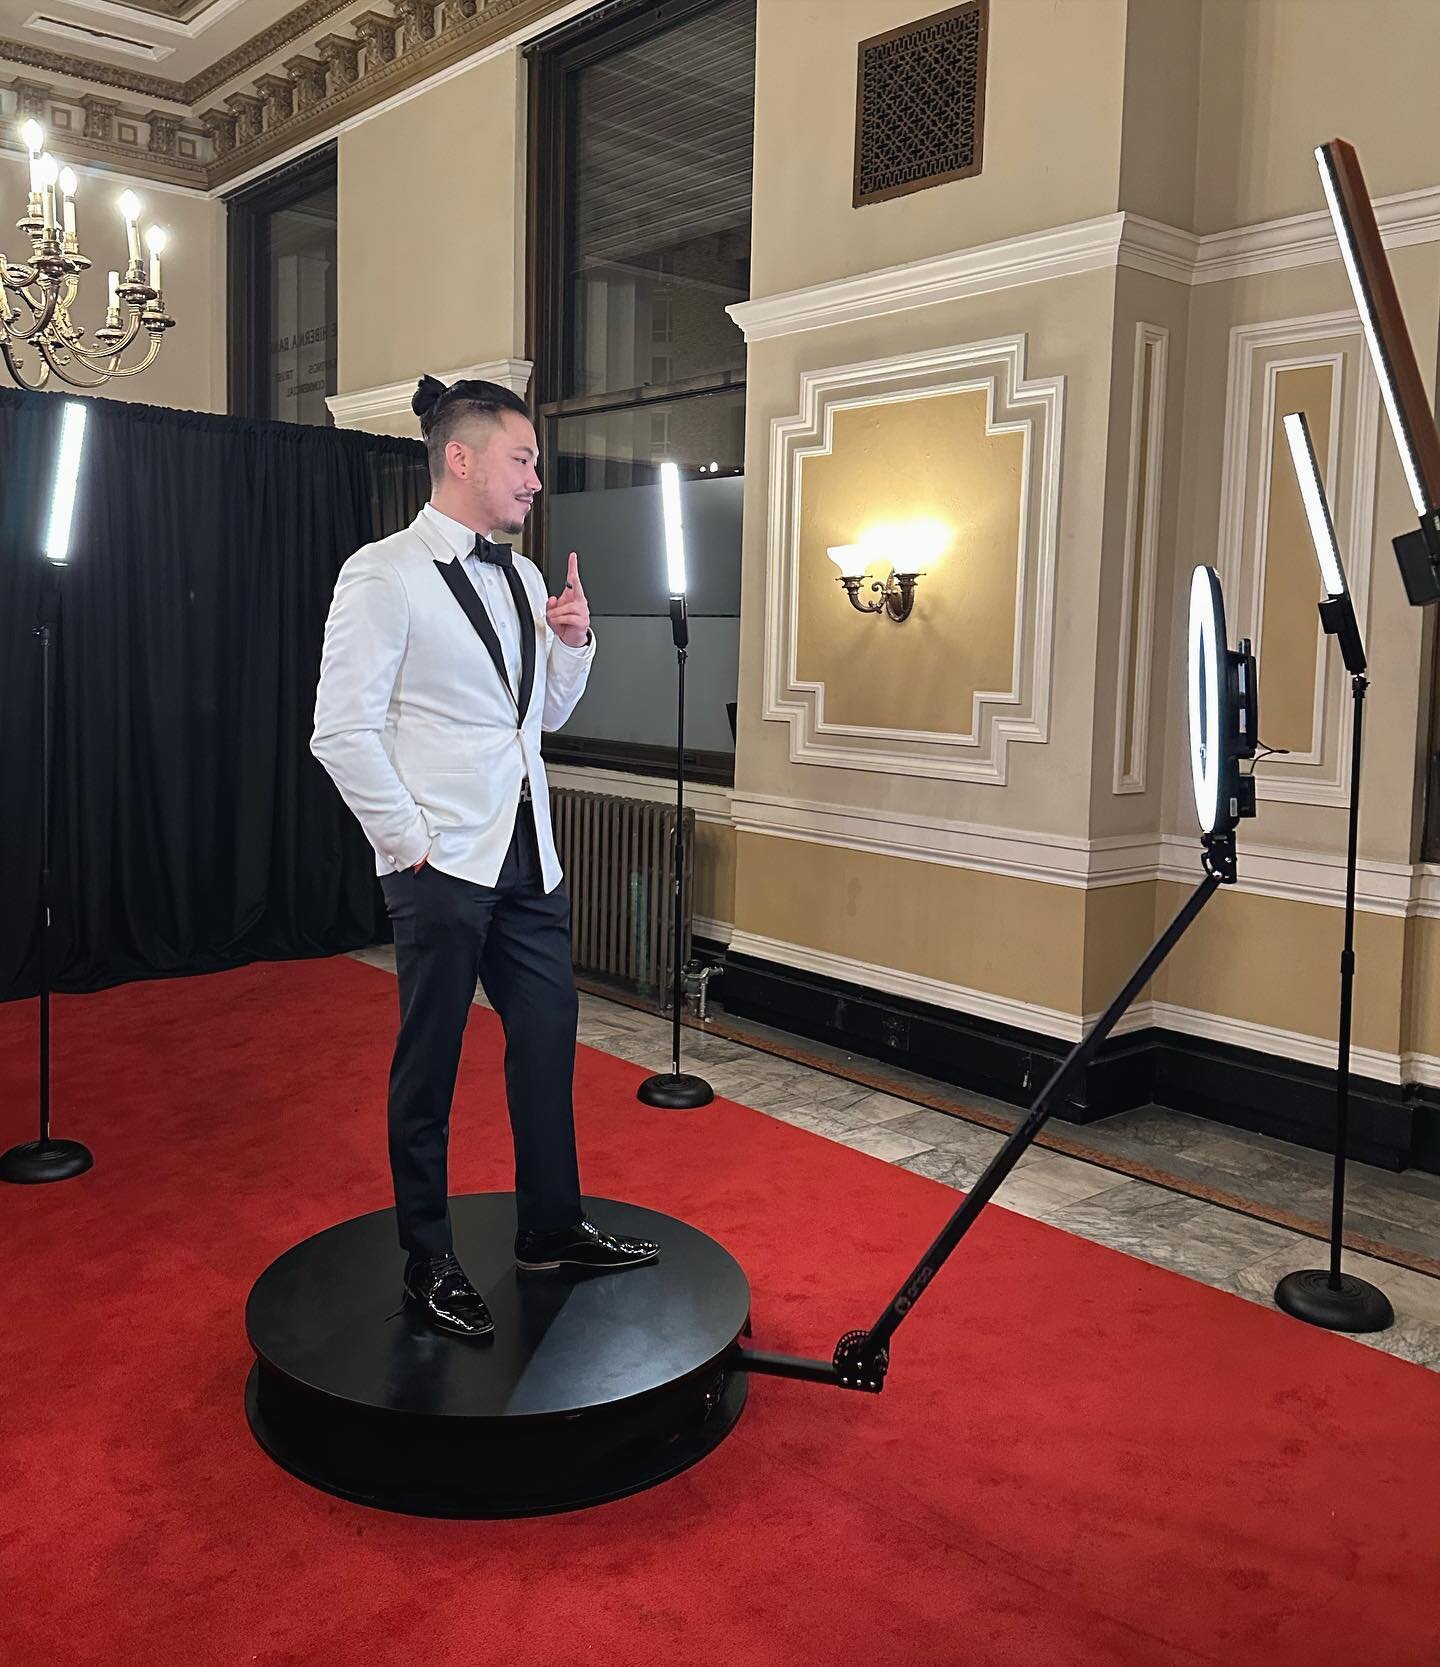 Capturing fun moments for @pbpsf 2022 with 360 + red carpet! ❤️

#pbp2022 #360videobooth #redcarpetexperience #photoactivation #videoactivation